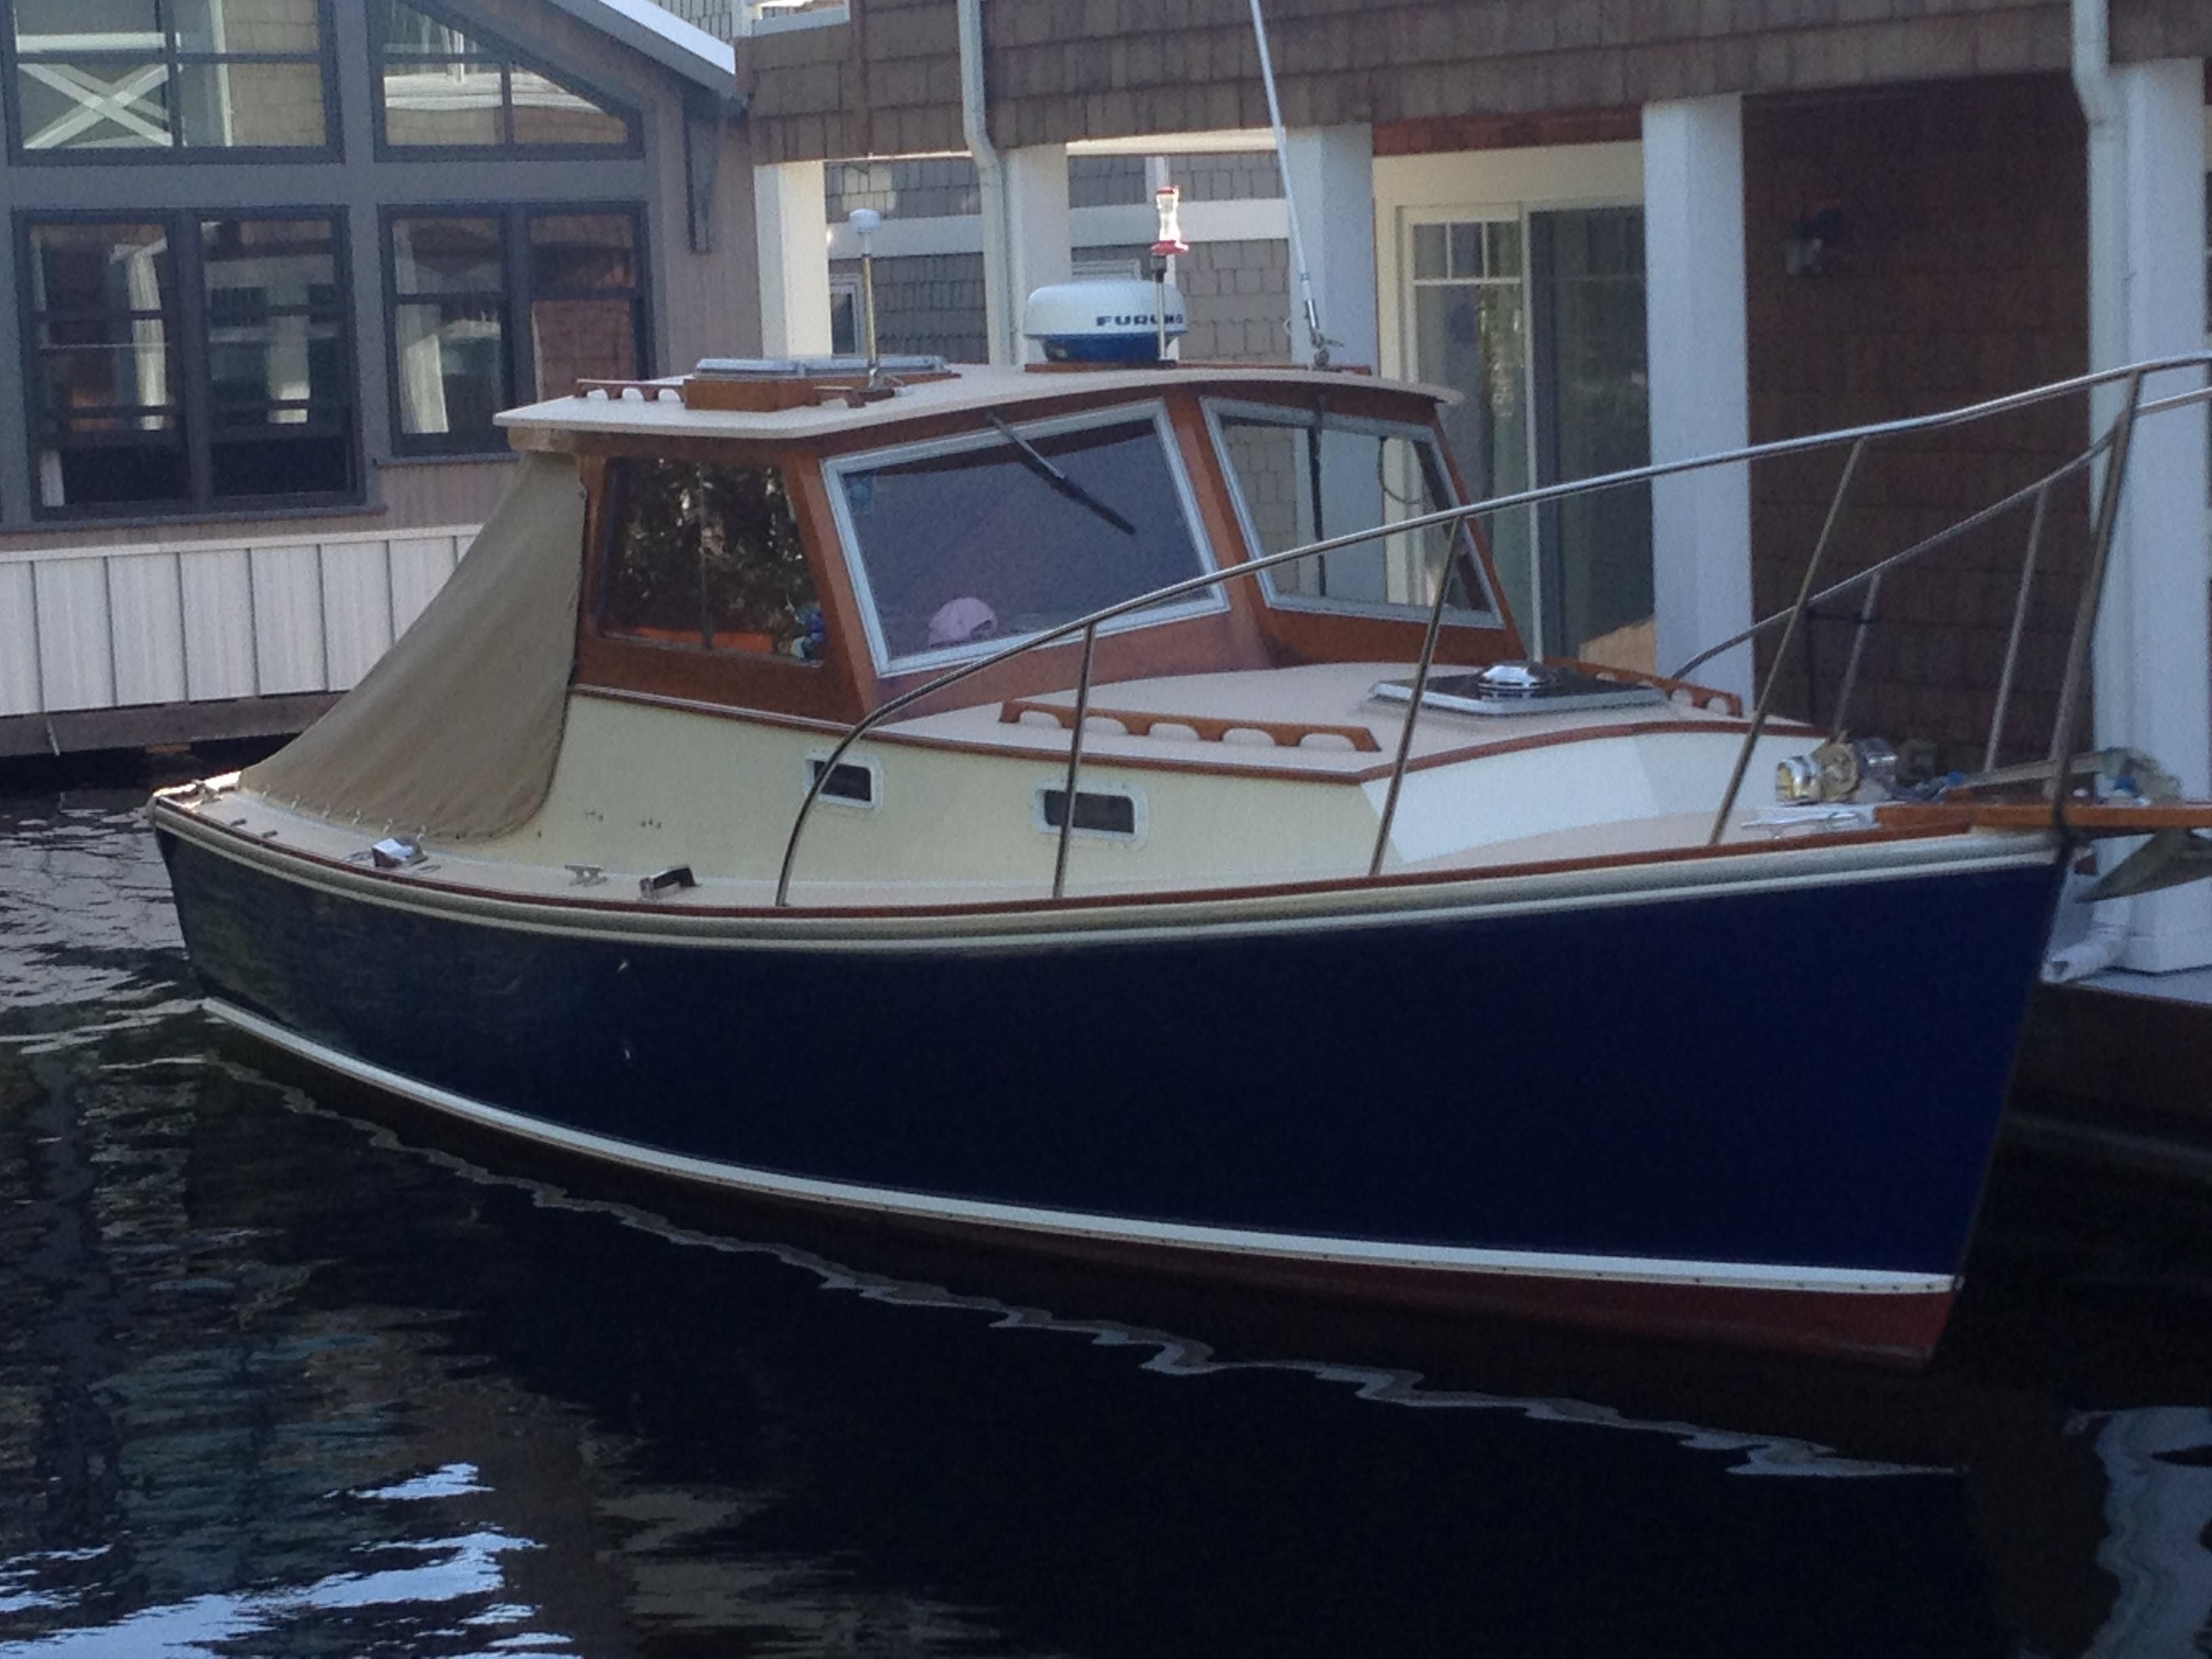 1987 Dyer 29 Hard Top Power Boat For Sale - www.yachtworld.com